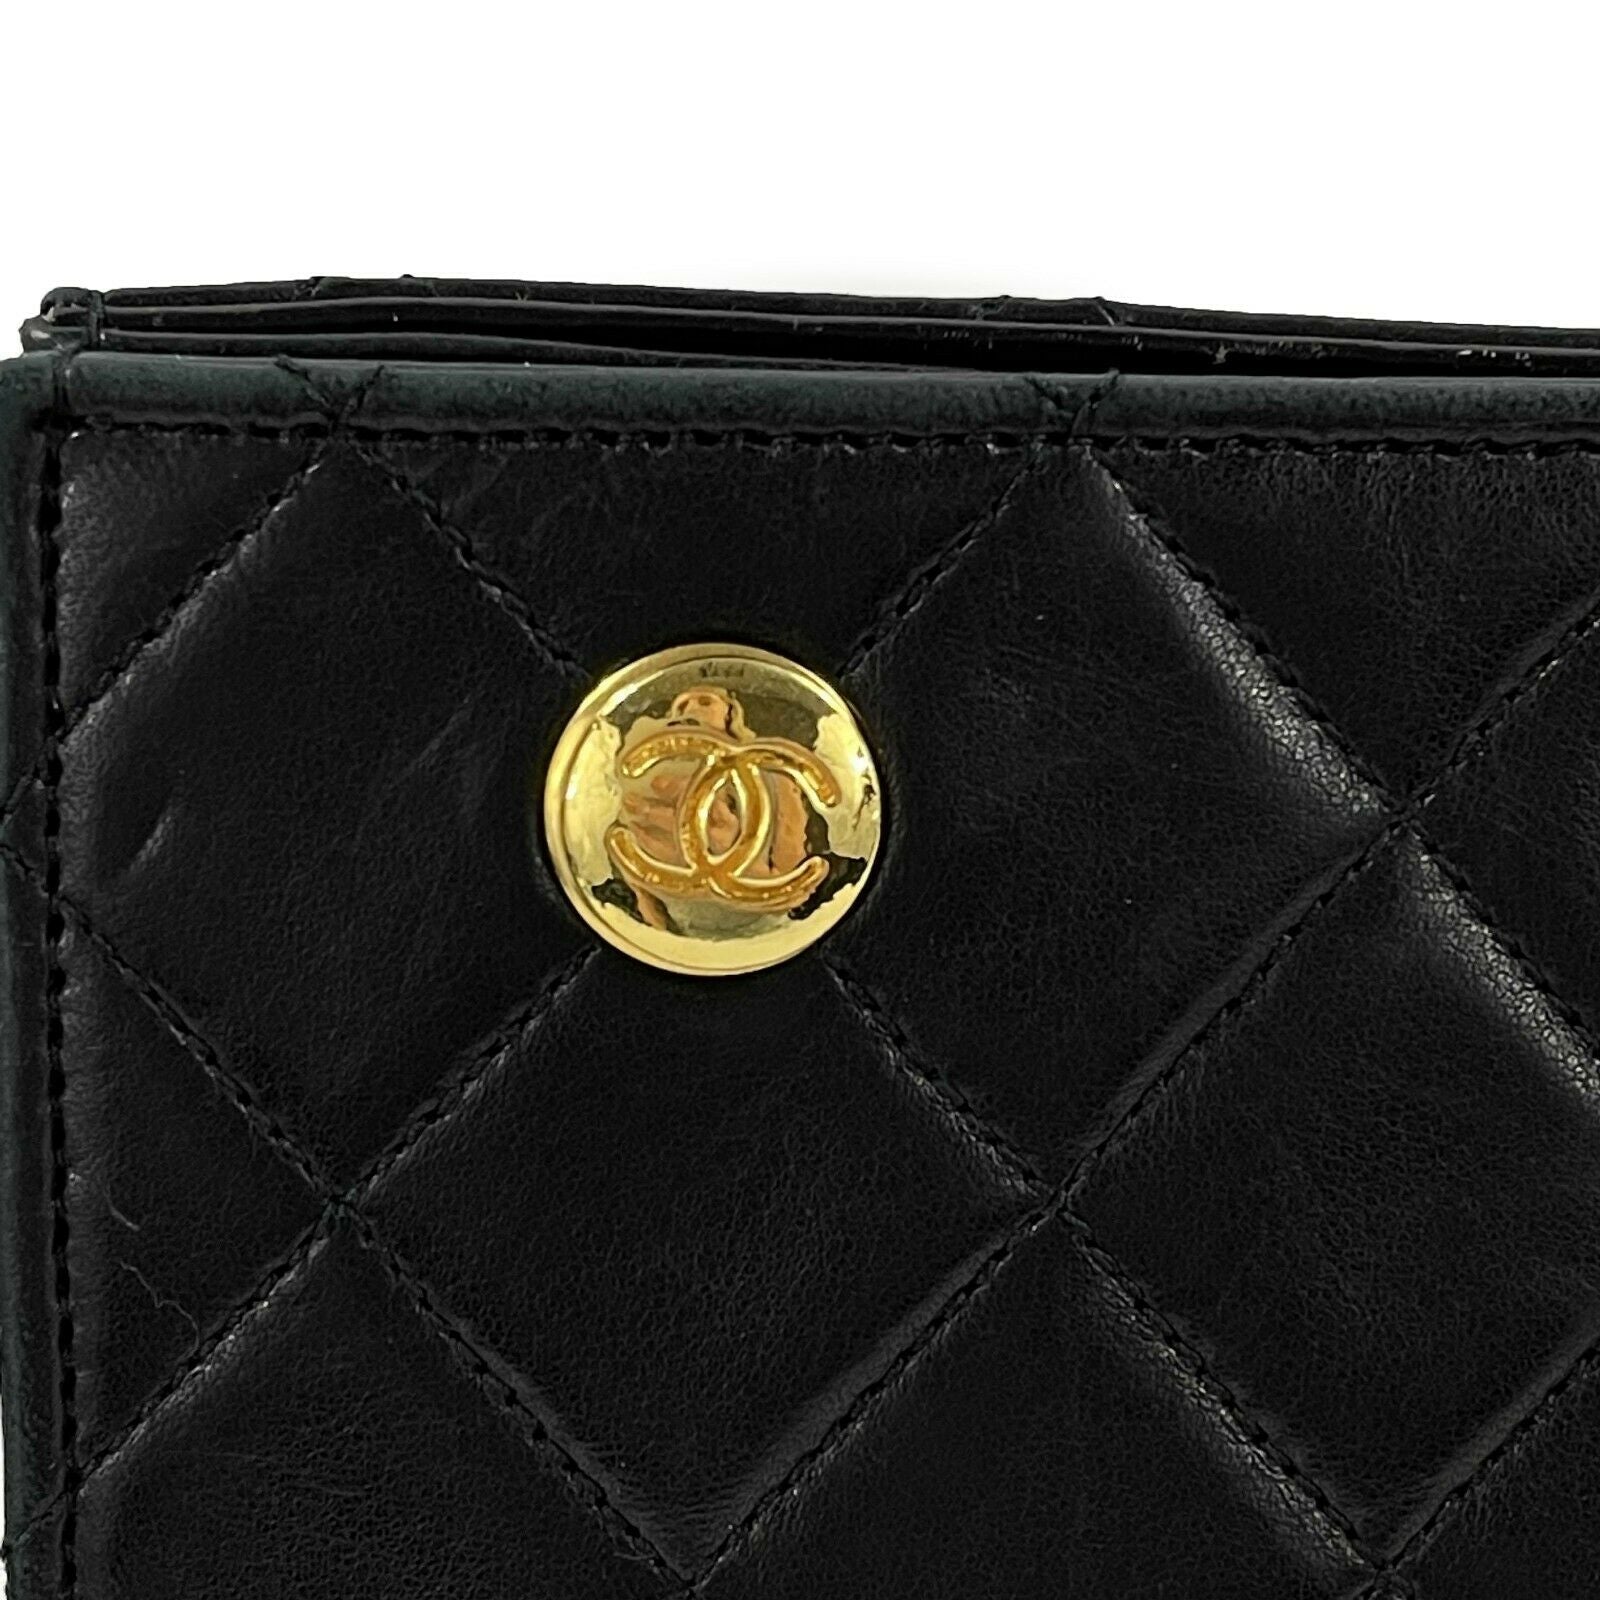 Chanel Black Fur Drawstring Bag with Gold and Silver Hardware – The Hangout